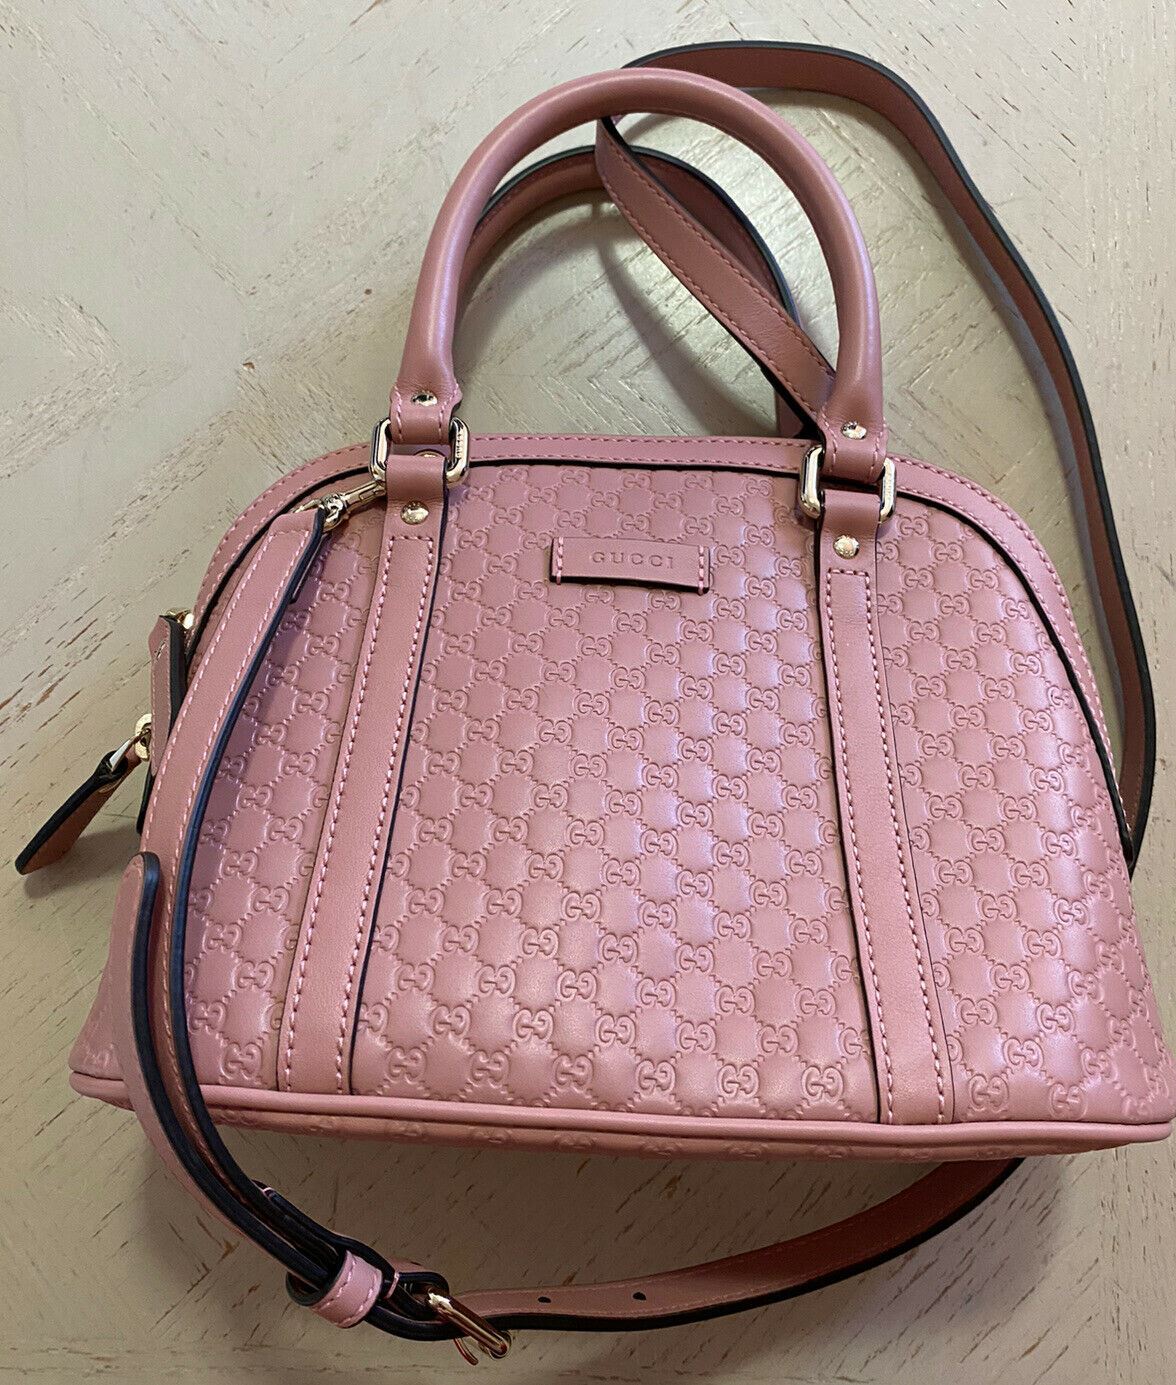 New Gucci Guccissimma Small Leather Crossbody Shoulder Bag Pink/LT Pink 449654